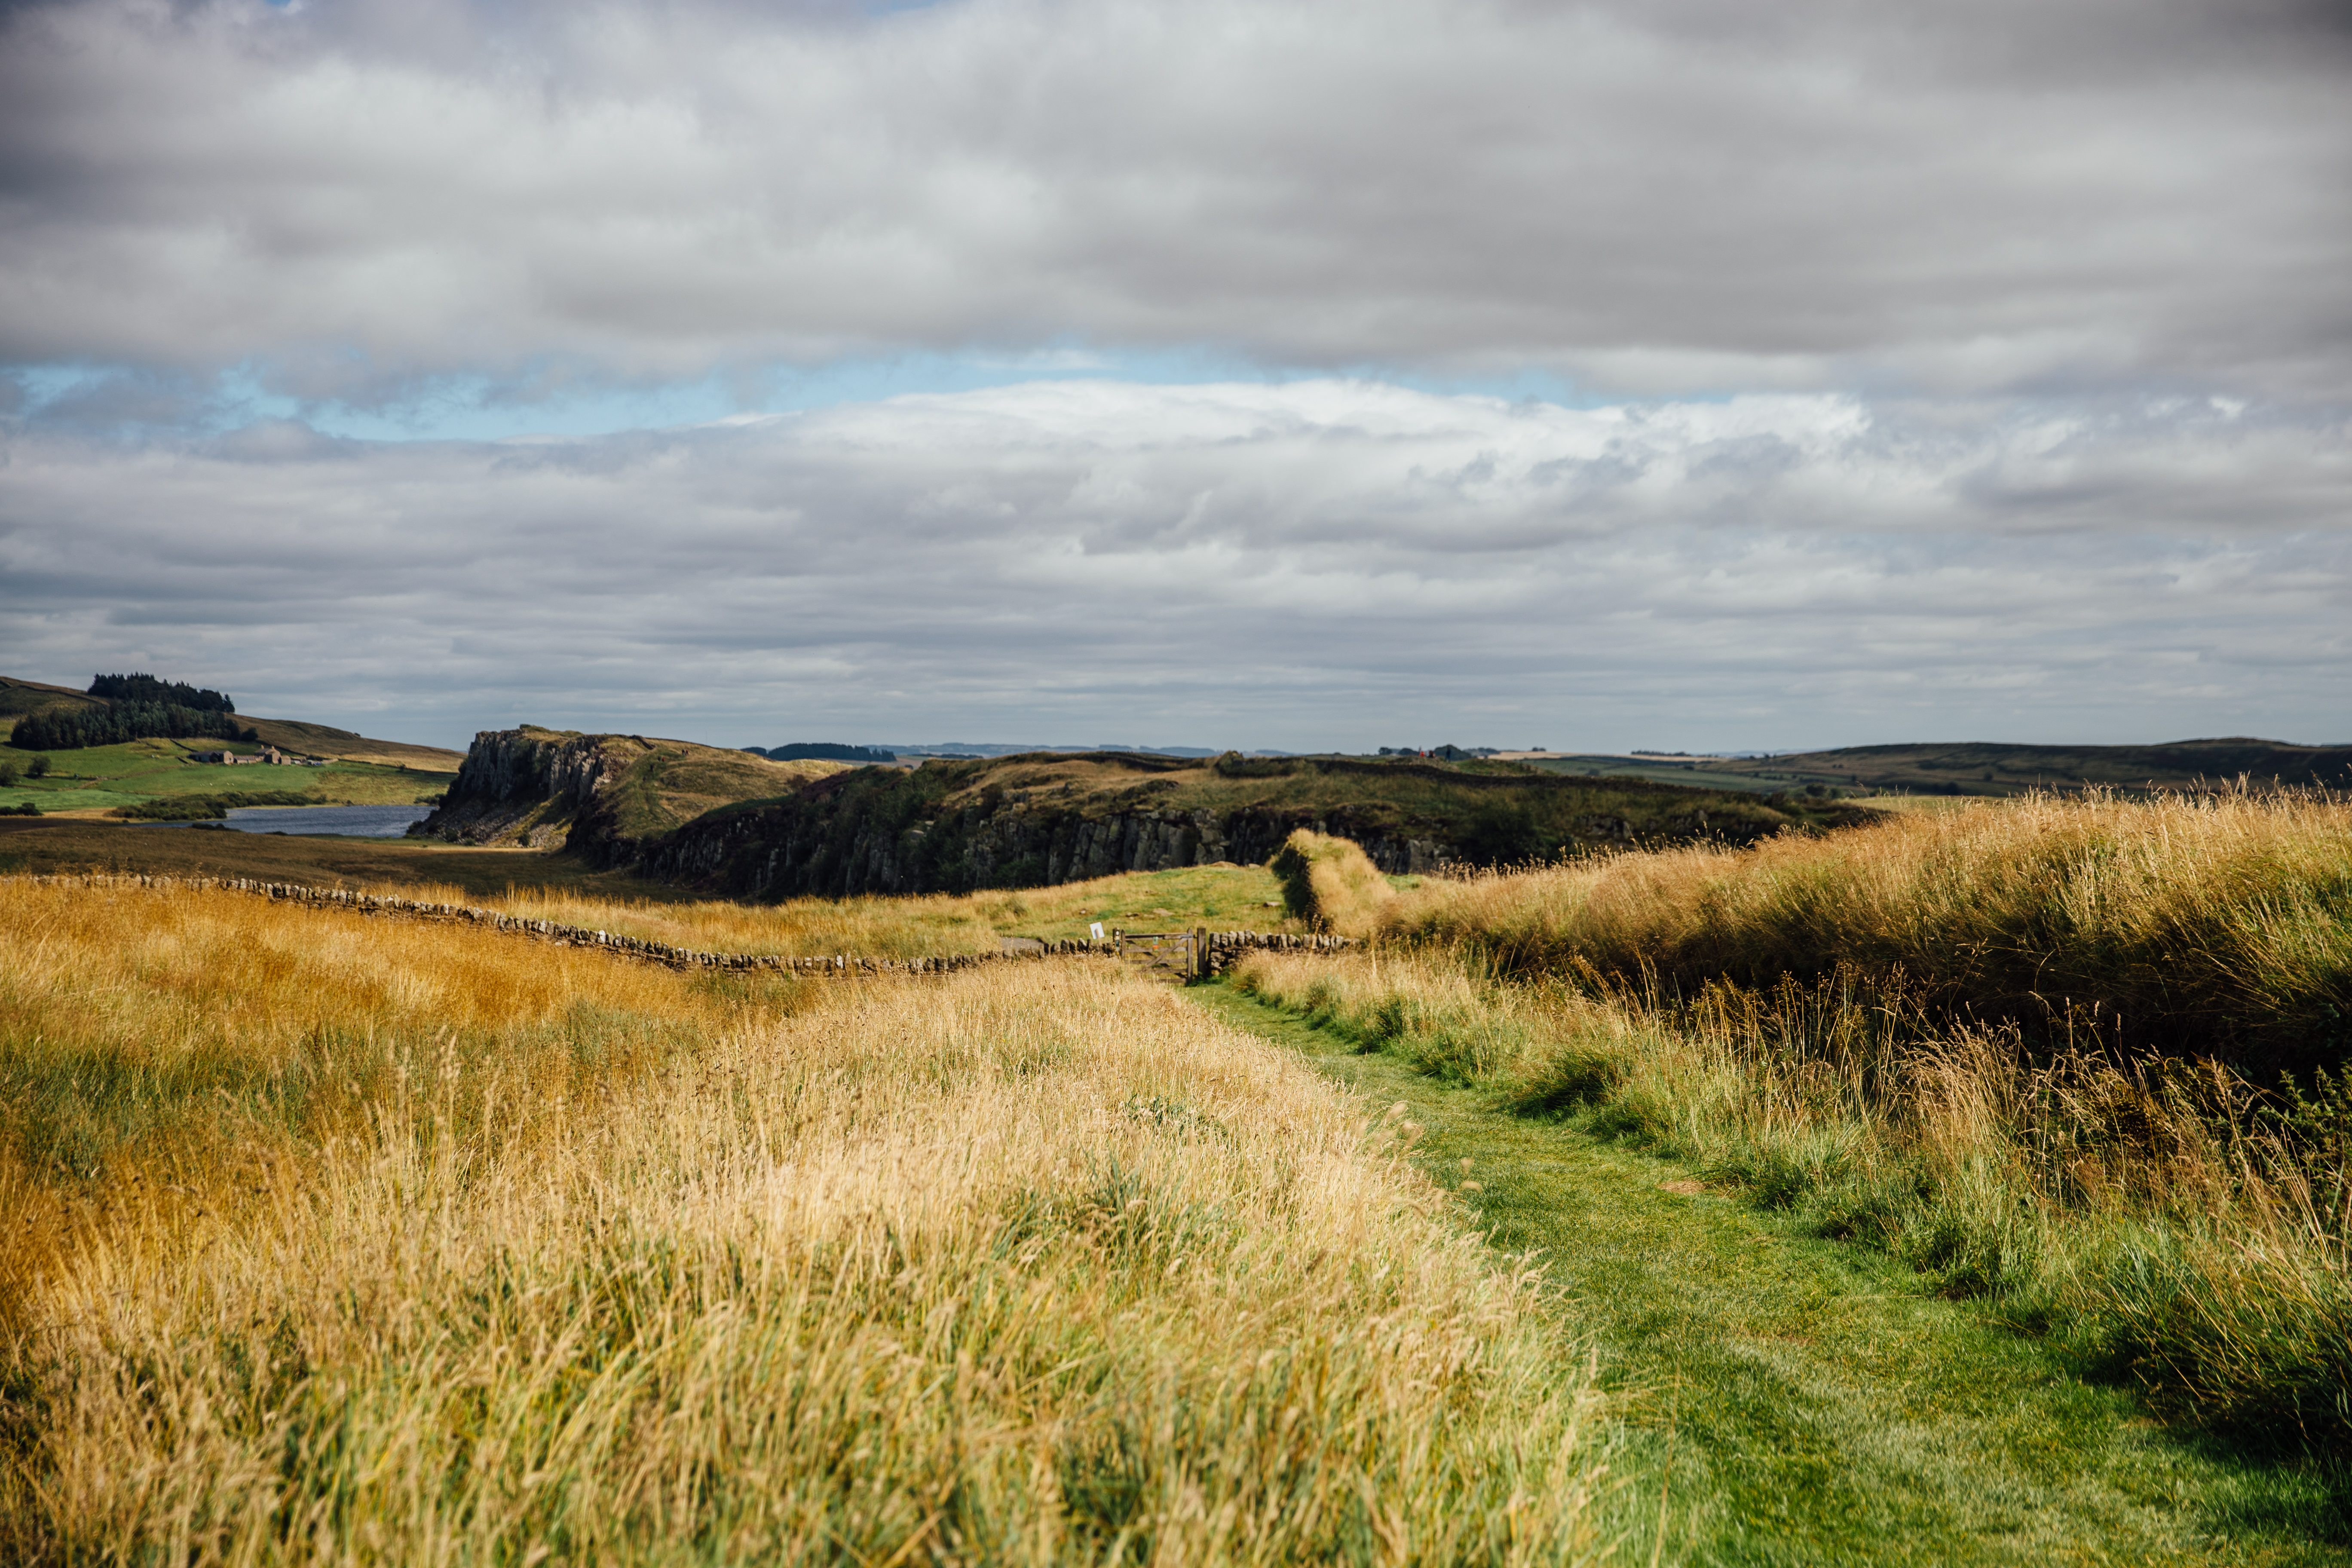 7 ways to explore the outdoors in North East England